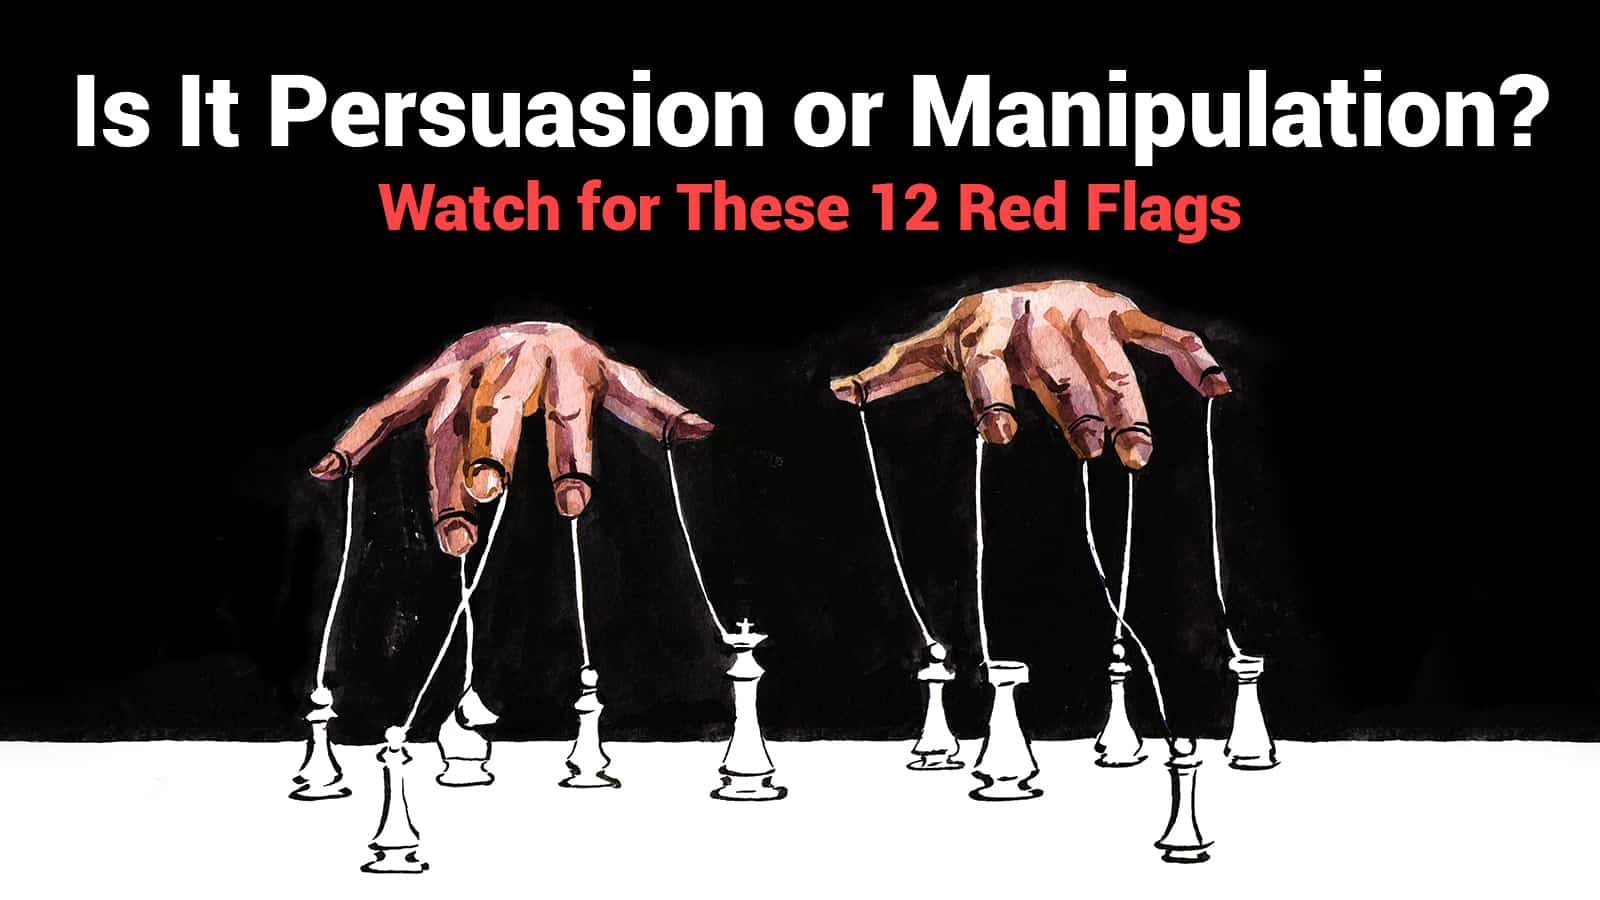 Is It Persuasion or Manipulation? Watch for These 12 Red Flags